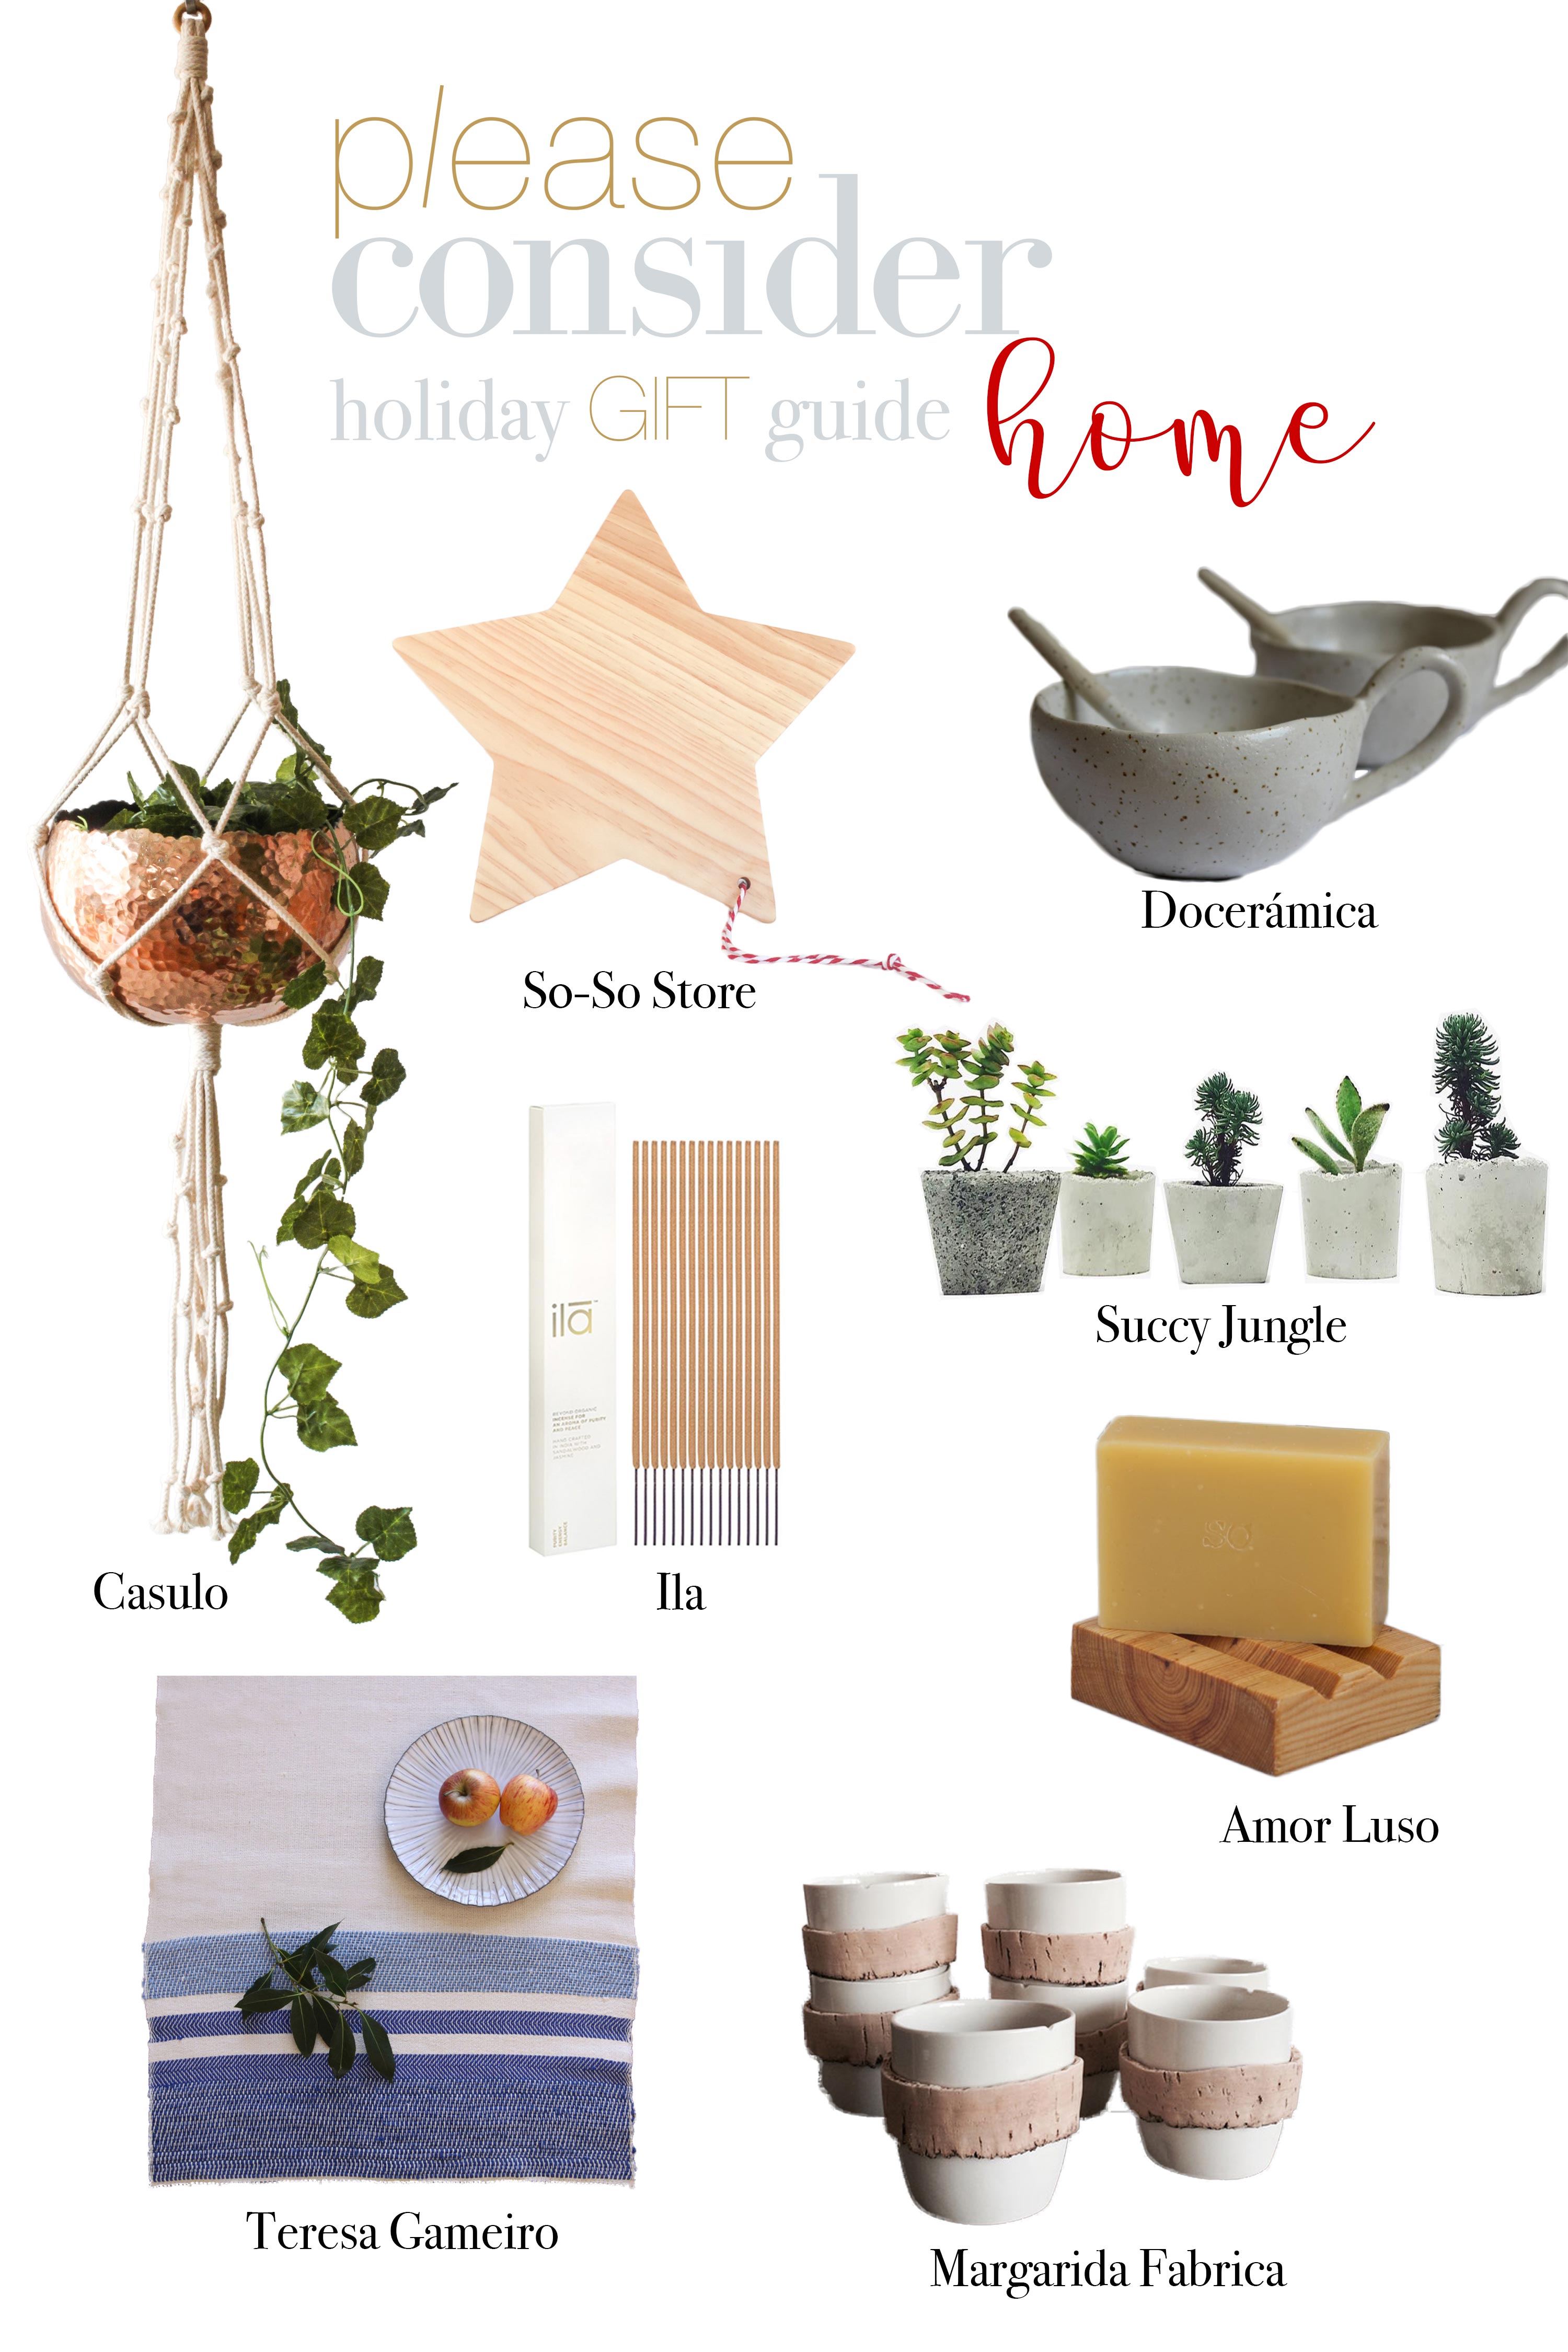 holiday gift guide for the home | please consider | joana limao